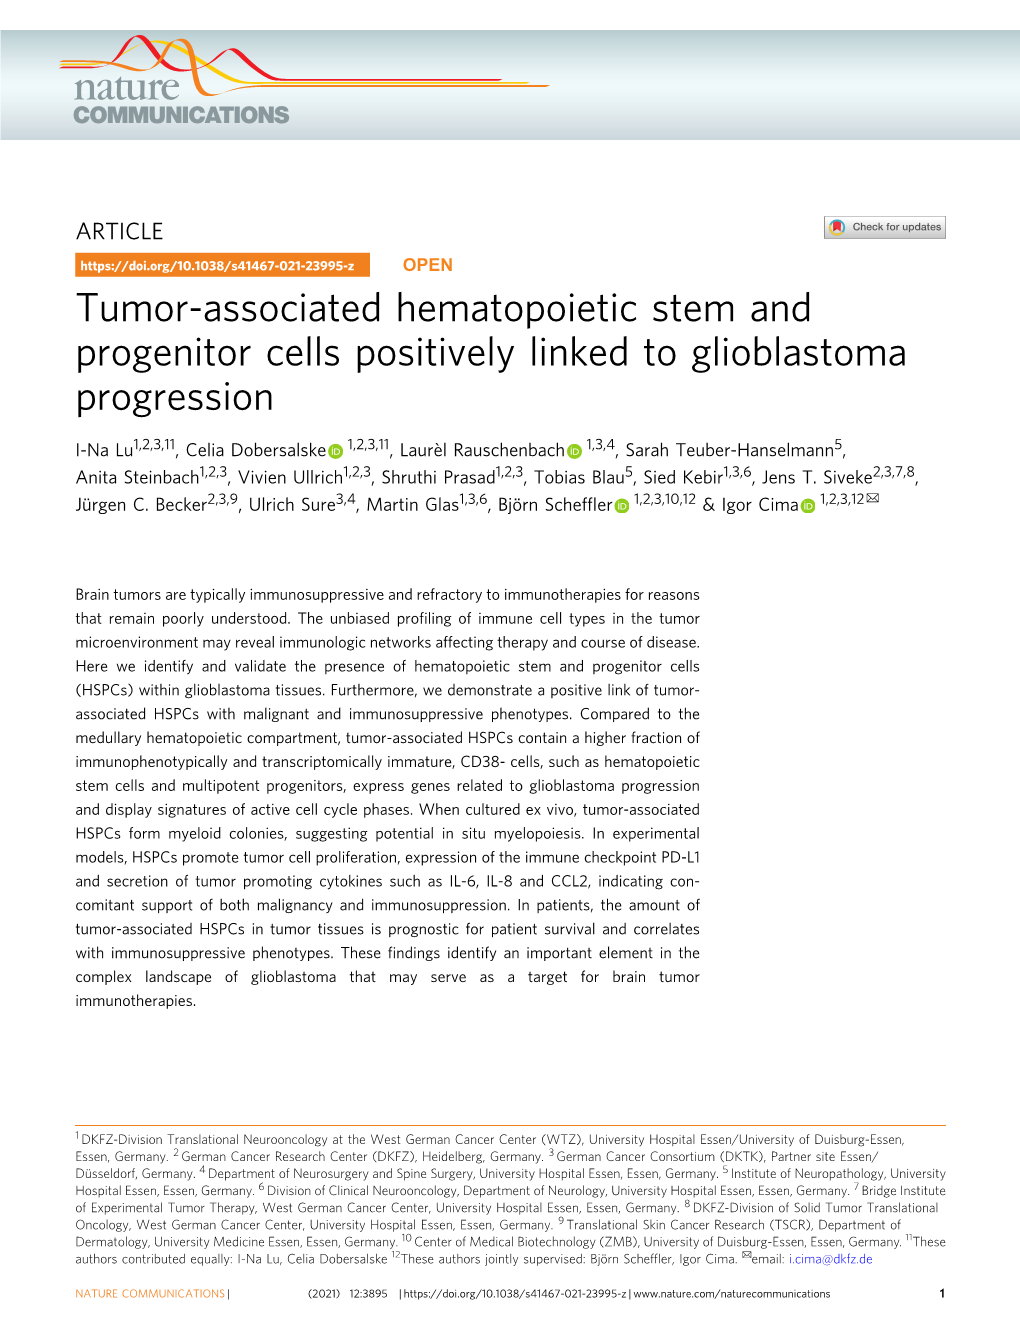 Tumor-Associated Hematopoietic Stem and Progenitor Cells Positively Linked to Glioblastoma Progression